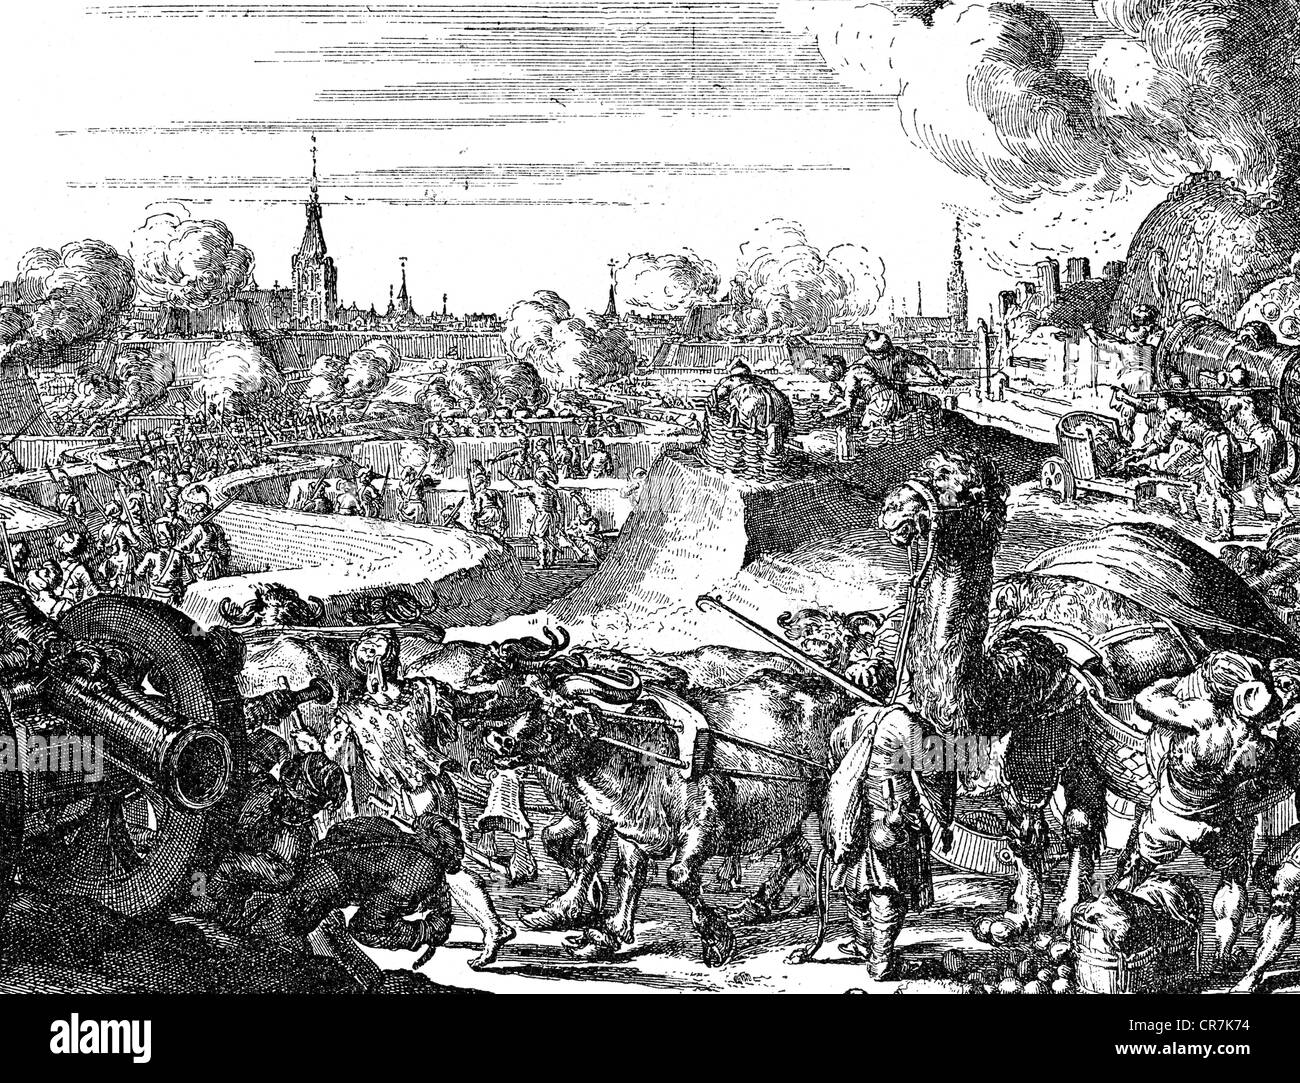 events, Great Turkish War 1683 - 1699, Siege of Vienna 14.7.- 12.9.1683, Turkish redoubts, contemporary copper engraving, Ottoman-Habsburg Wars, Turks, Ottoman Empire, field fortifications, trench, trenches, 17th century, historic, historical, people, Artist's Copyright has not to be cleared Stock Photo